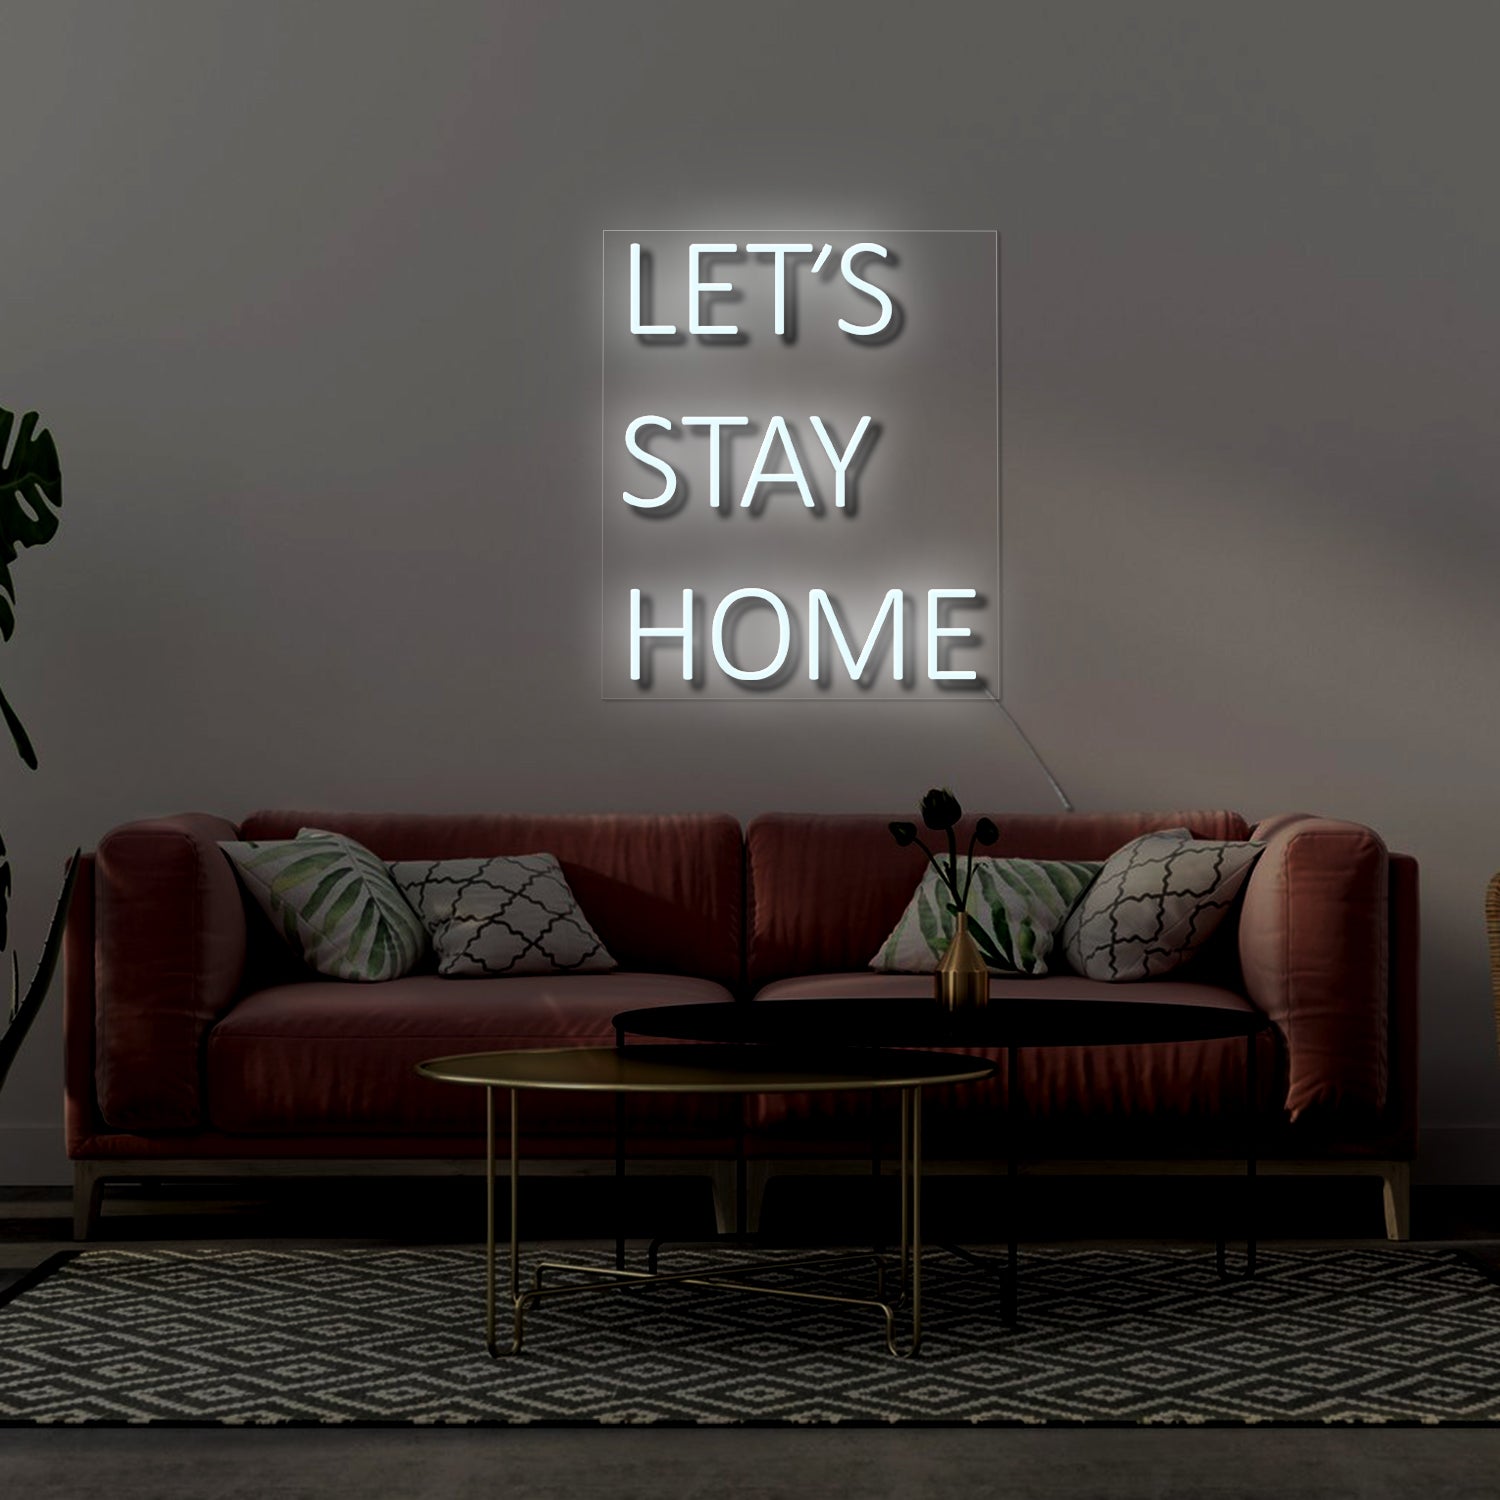 LET'S STAY HOME - neoon.eu